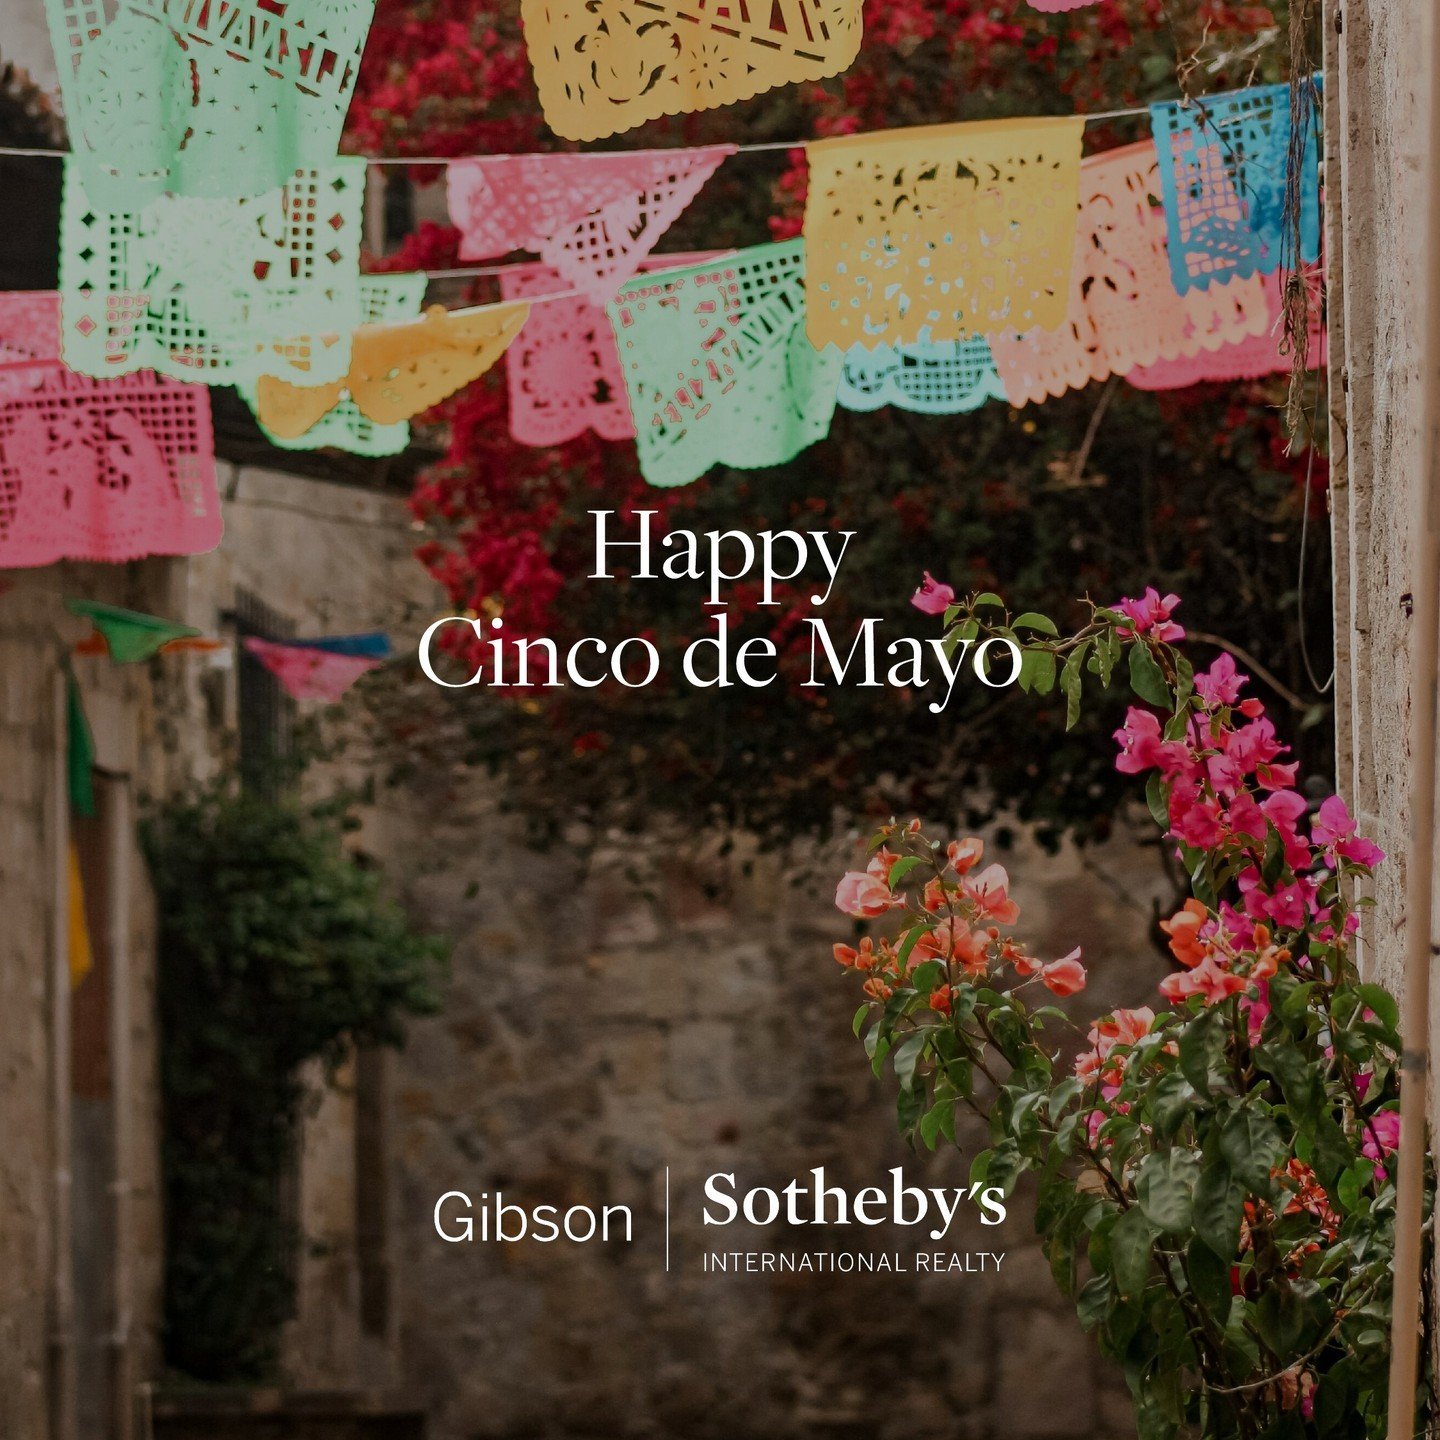 Happy Cinco de Mayo! Today, we celebrate the vibrant culture, rich traditions, and resilience of the Mexican community.

#CincoDeMayo #MexicanHeritage #VivaMexico